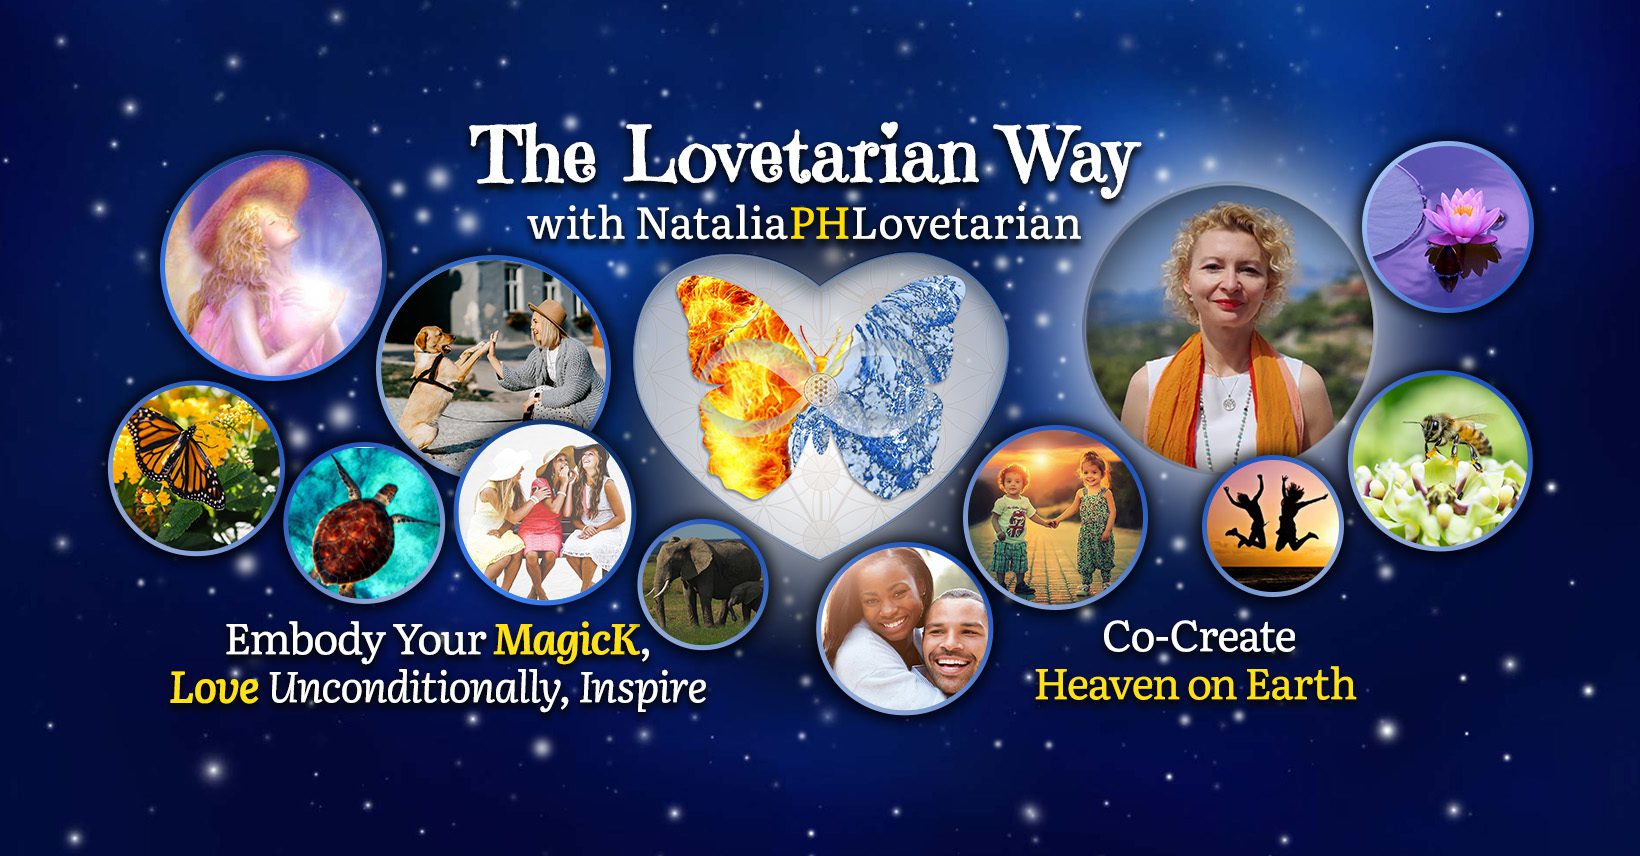 Welcome to The Lovetarian Way Movement!